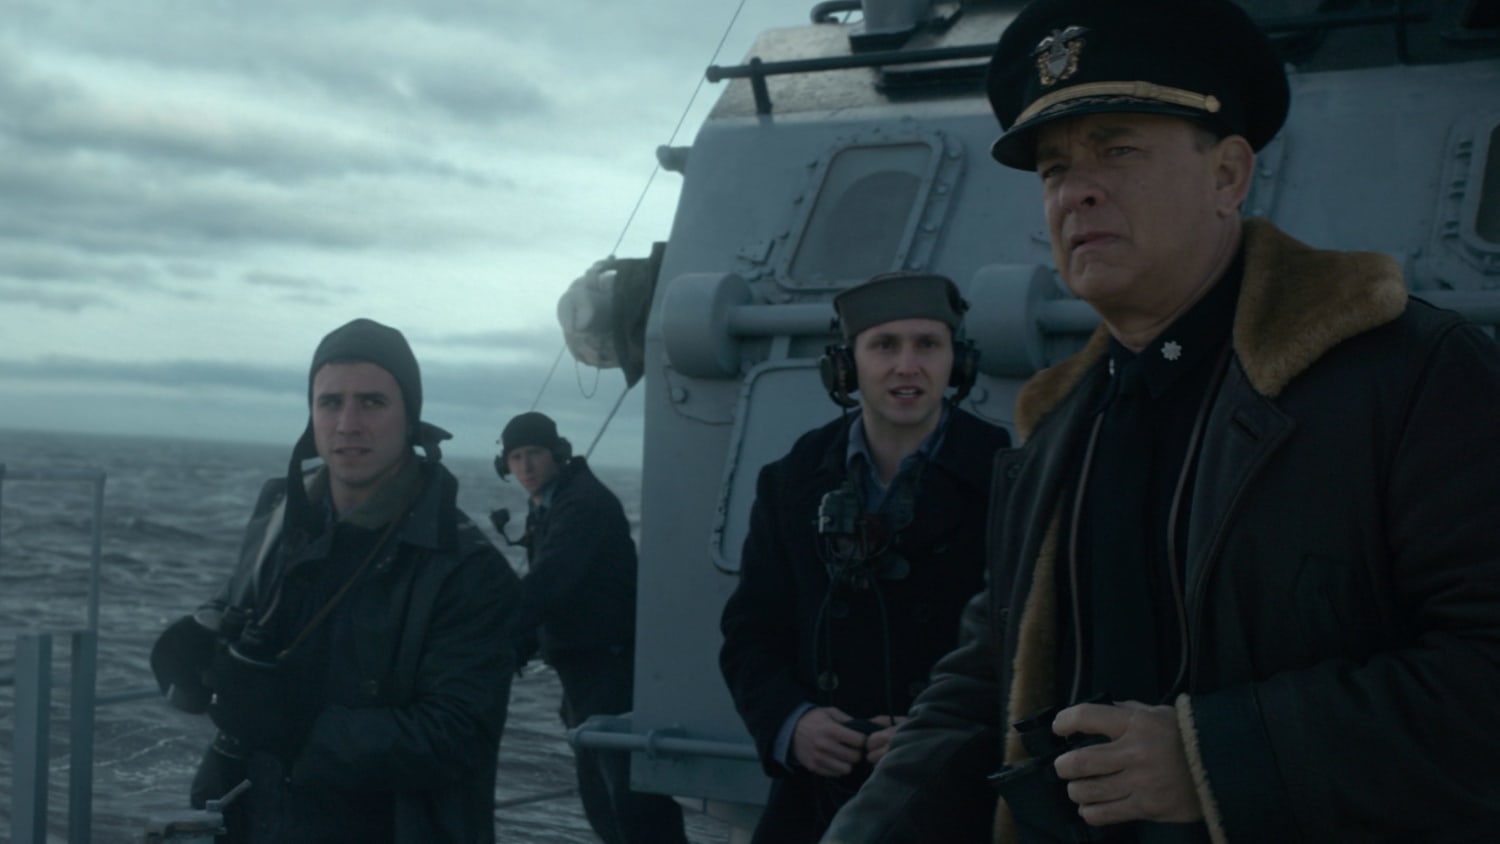 'Greyhound' battles for realistic destroyer action: How accurate is Tom Hanks' World War II drama?